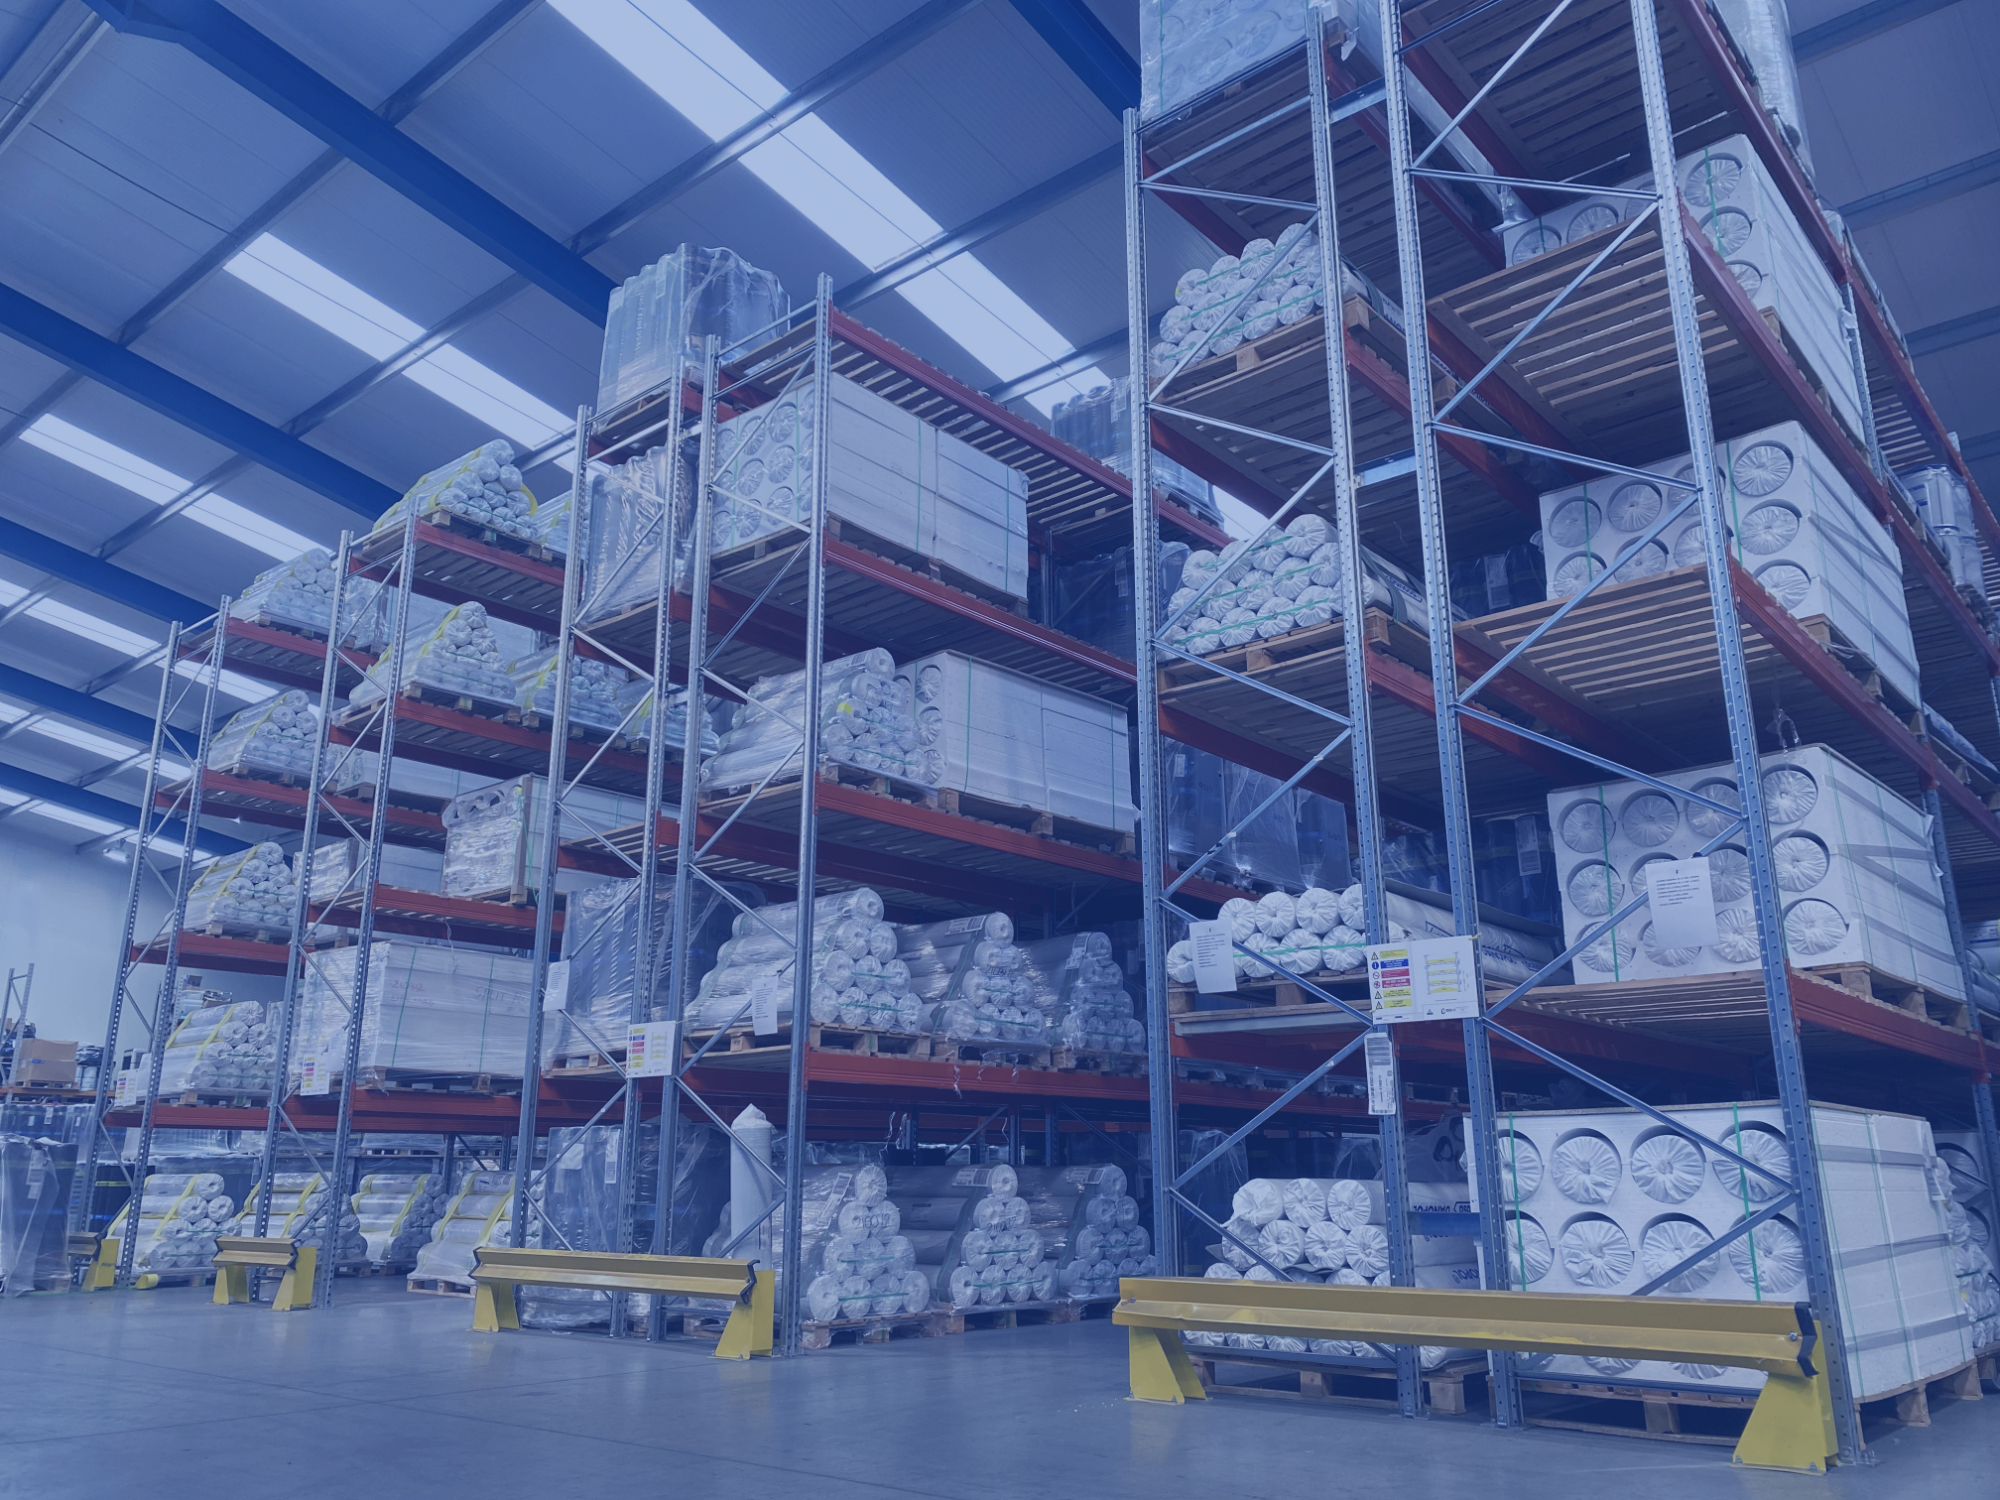 Roofing Products in a UK Warehouse for UK Distribution of Roofing Materials